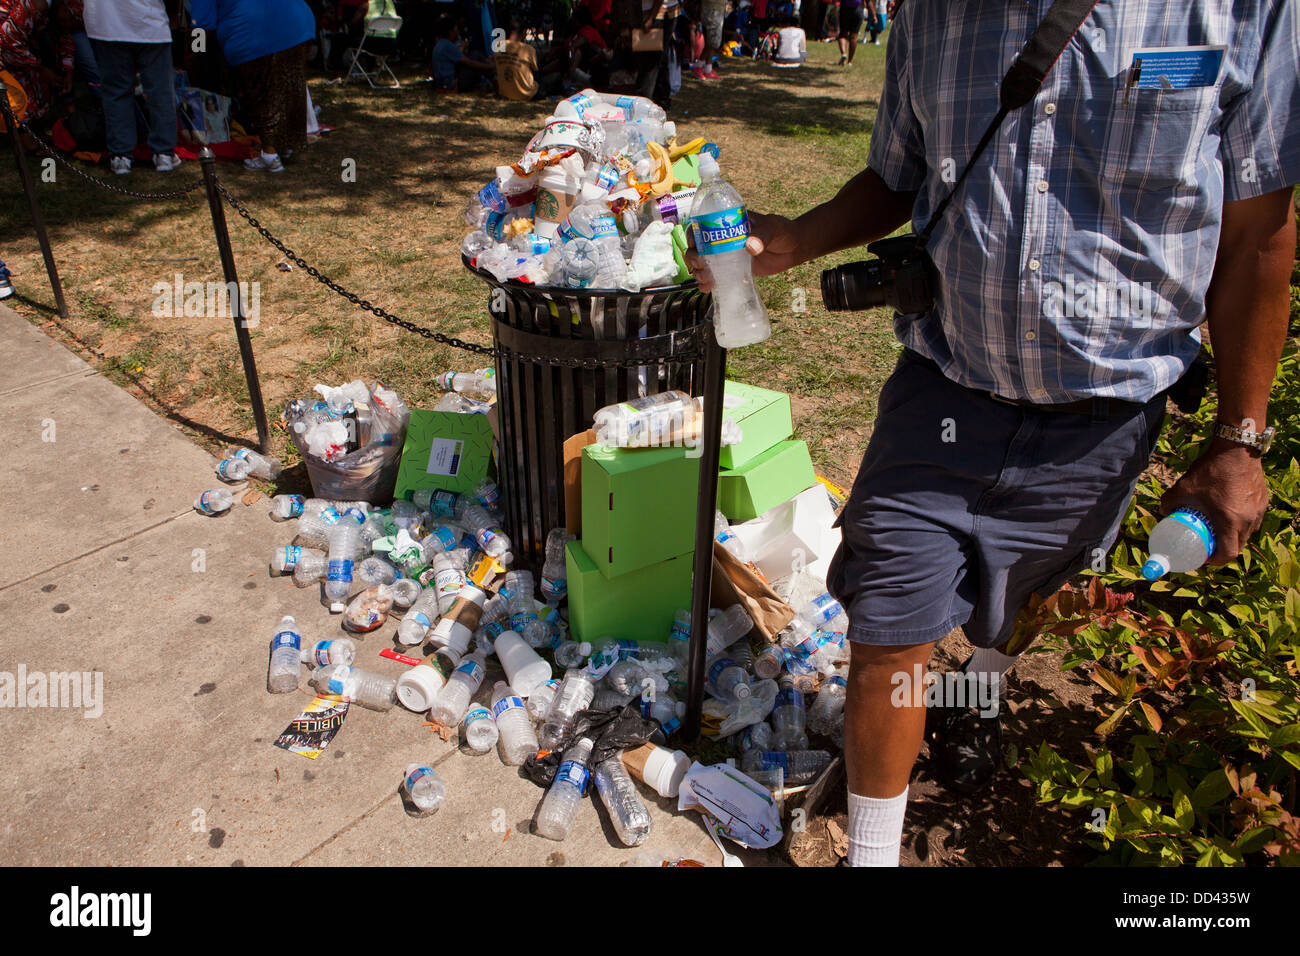 Discarded plastic water bottles overflowing from waste bin - USA Stock Photo